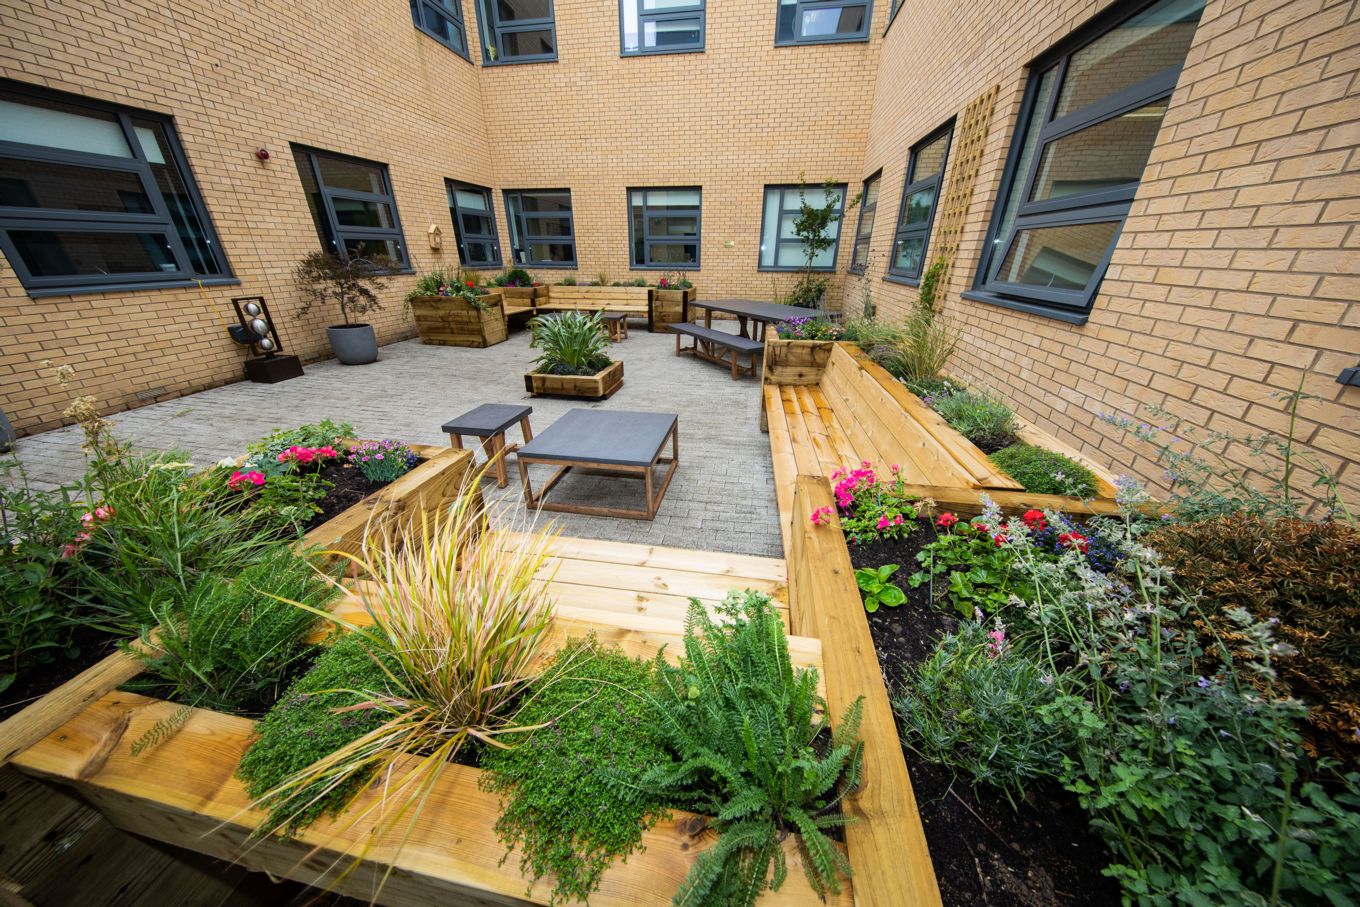 The picturesque wellbeing garden which provides a calming and relaxing area for all personnel to enjoy